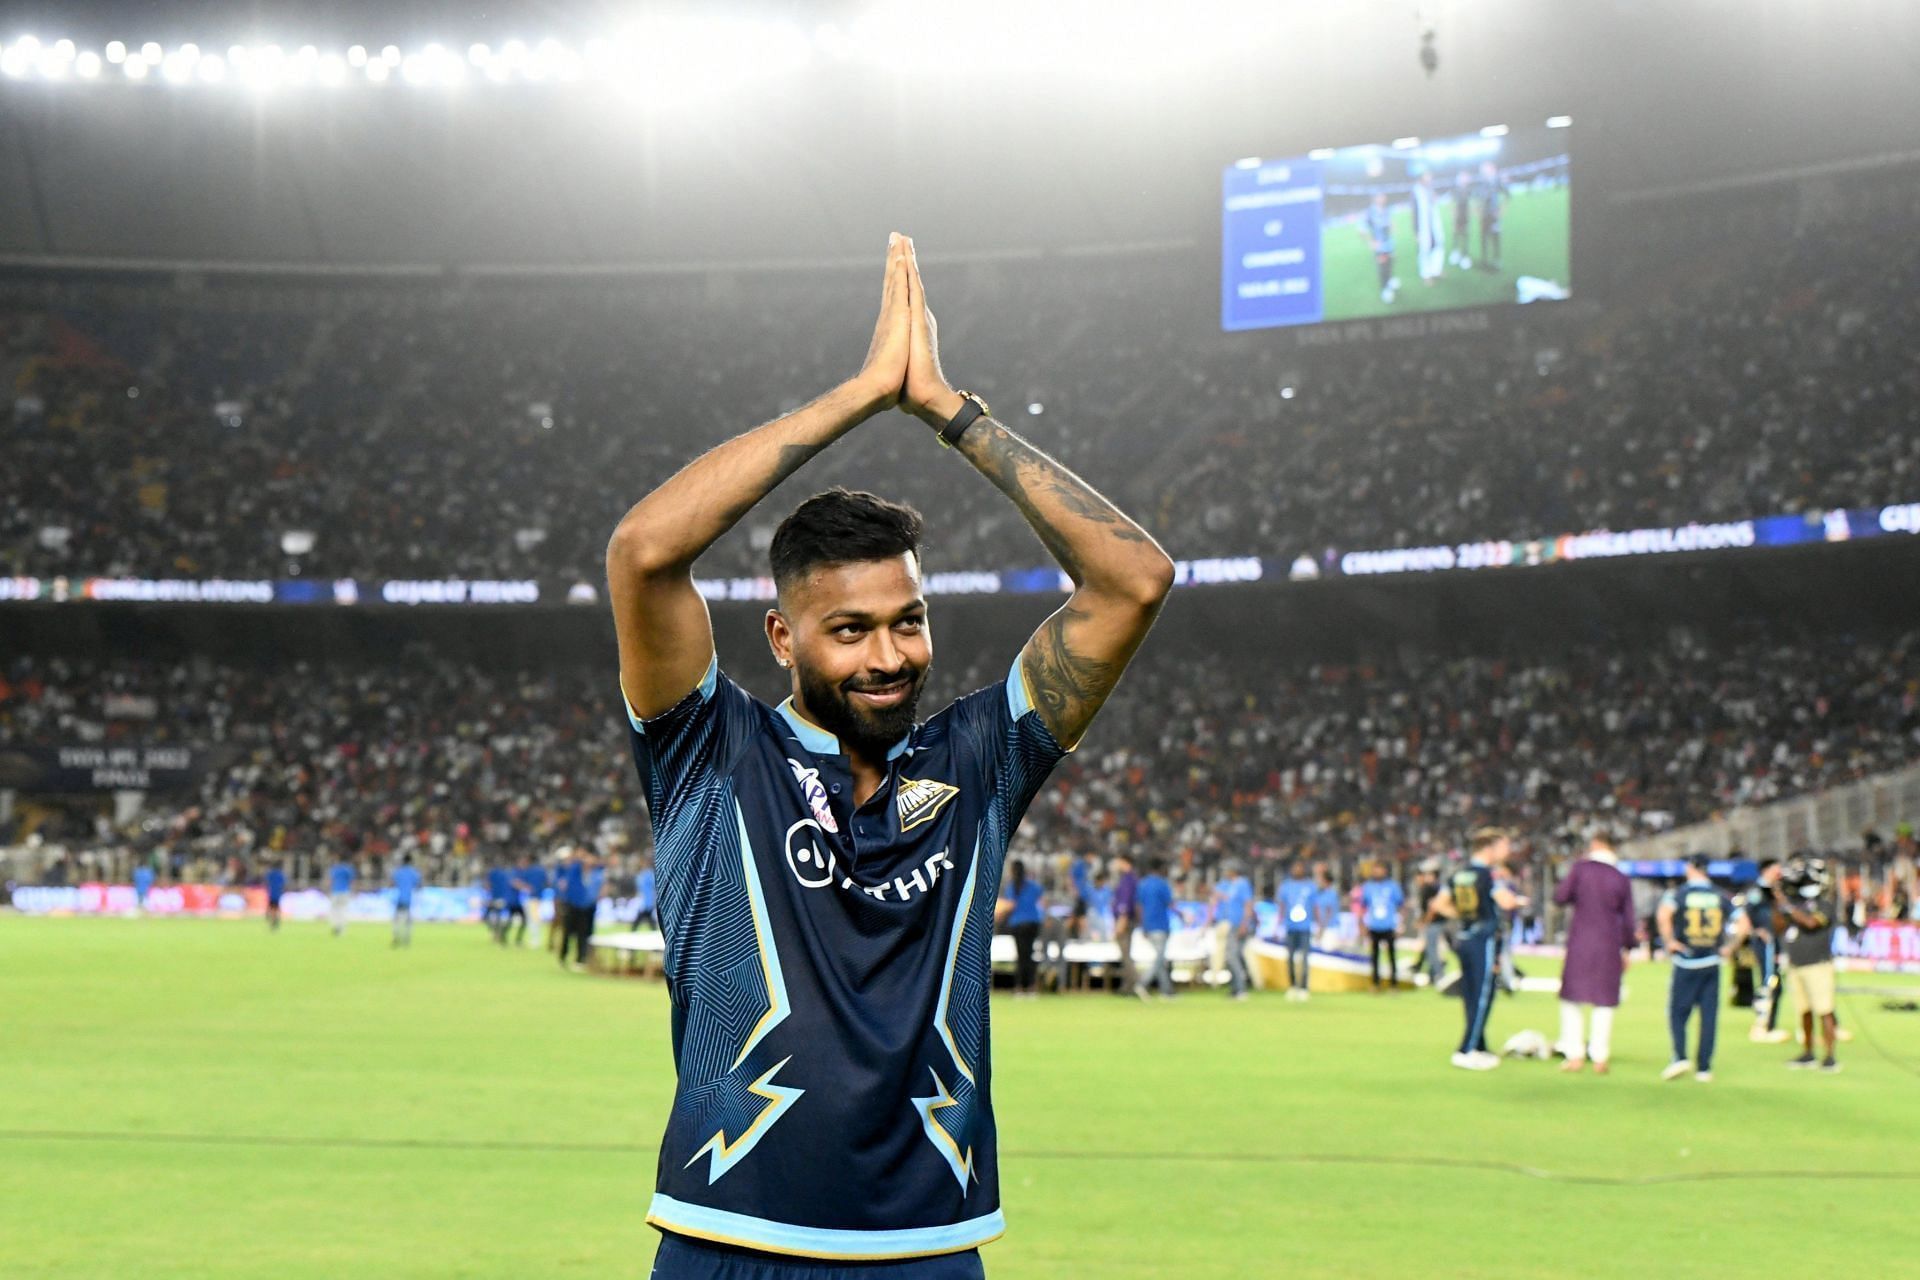 Hardik Pandya acknowledges the Motera crowd after leading GT to IPL victory in their maiden season. Pic: IPLT20.COM